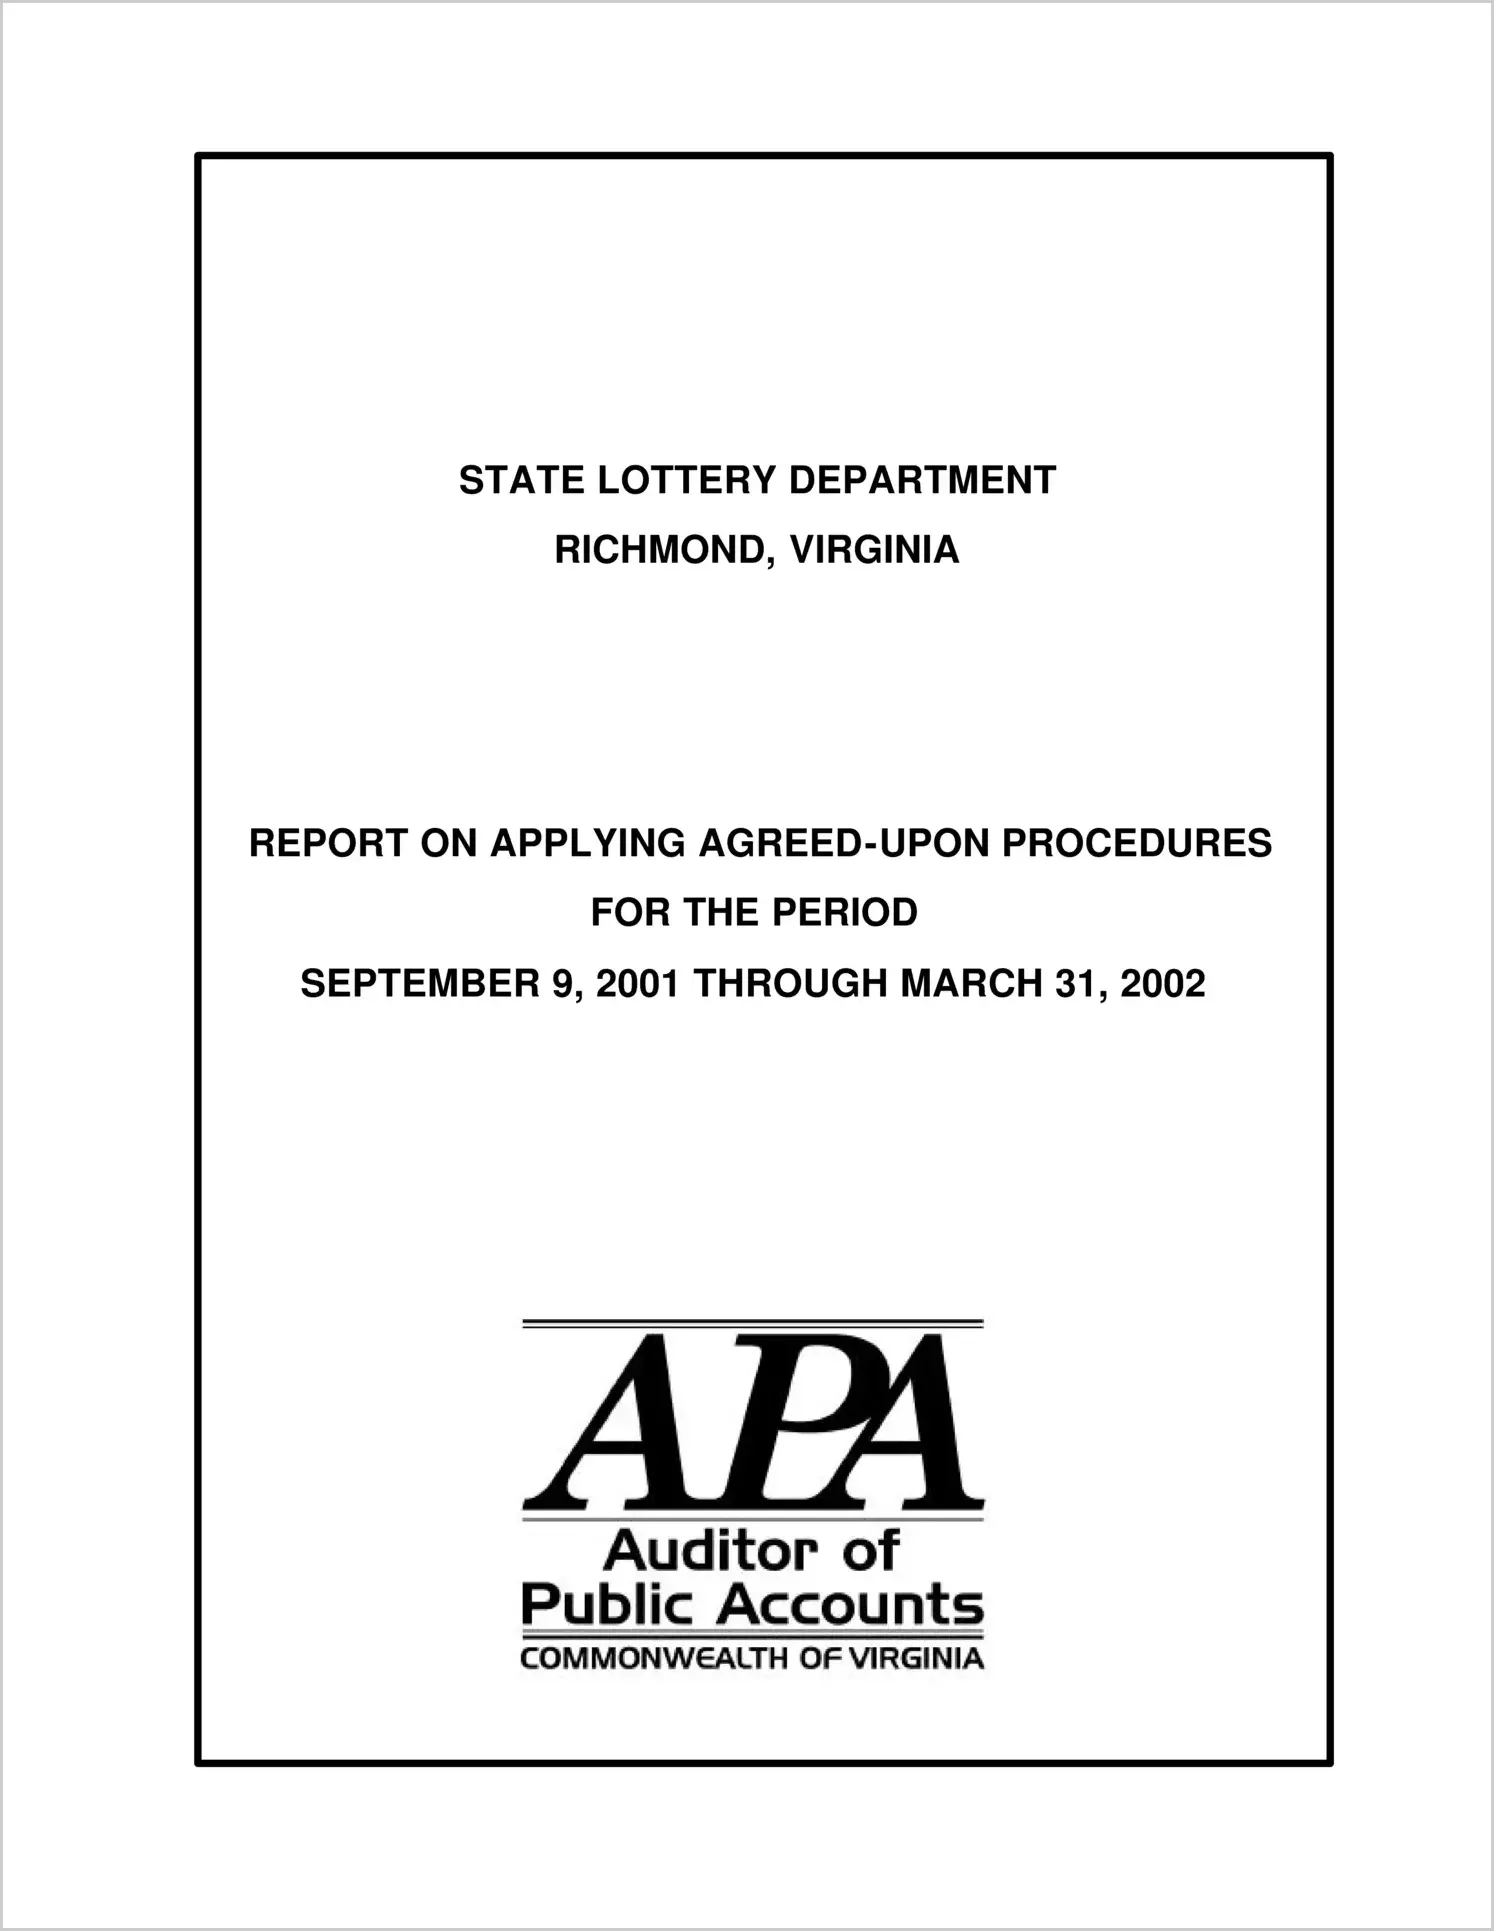 Special ReportState Lottery Department Report on Applying Agreed-Upon Procedures (Lotto South)(Report Period: 9/9/2001 - 3/31/2002)